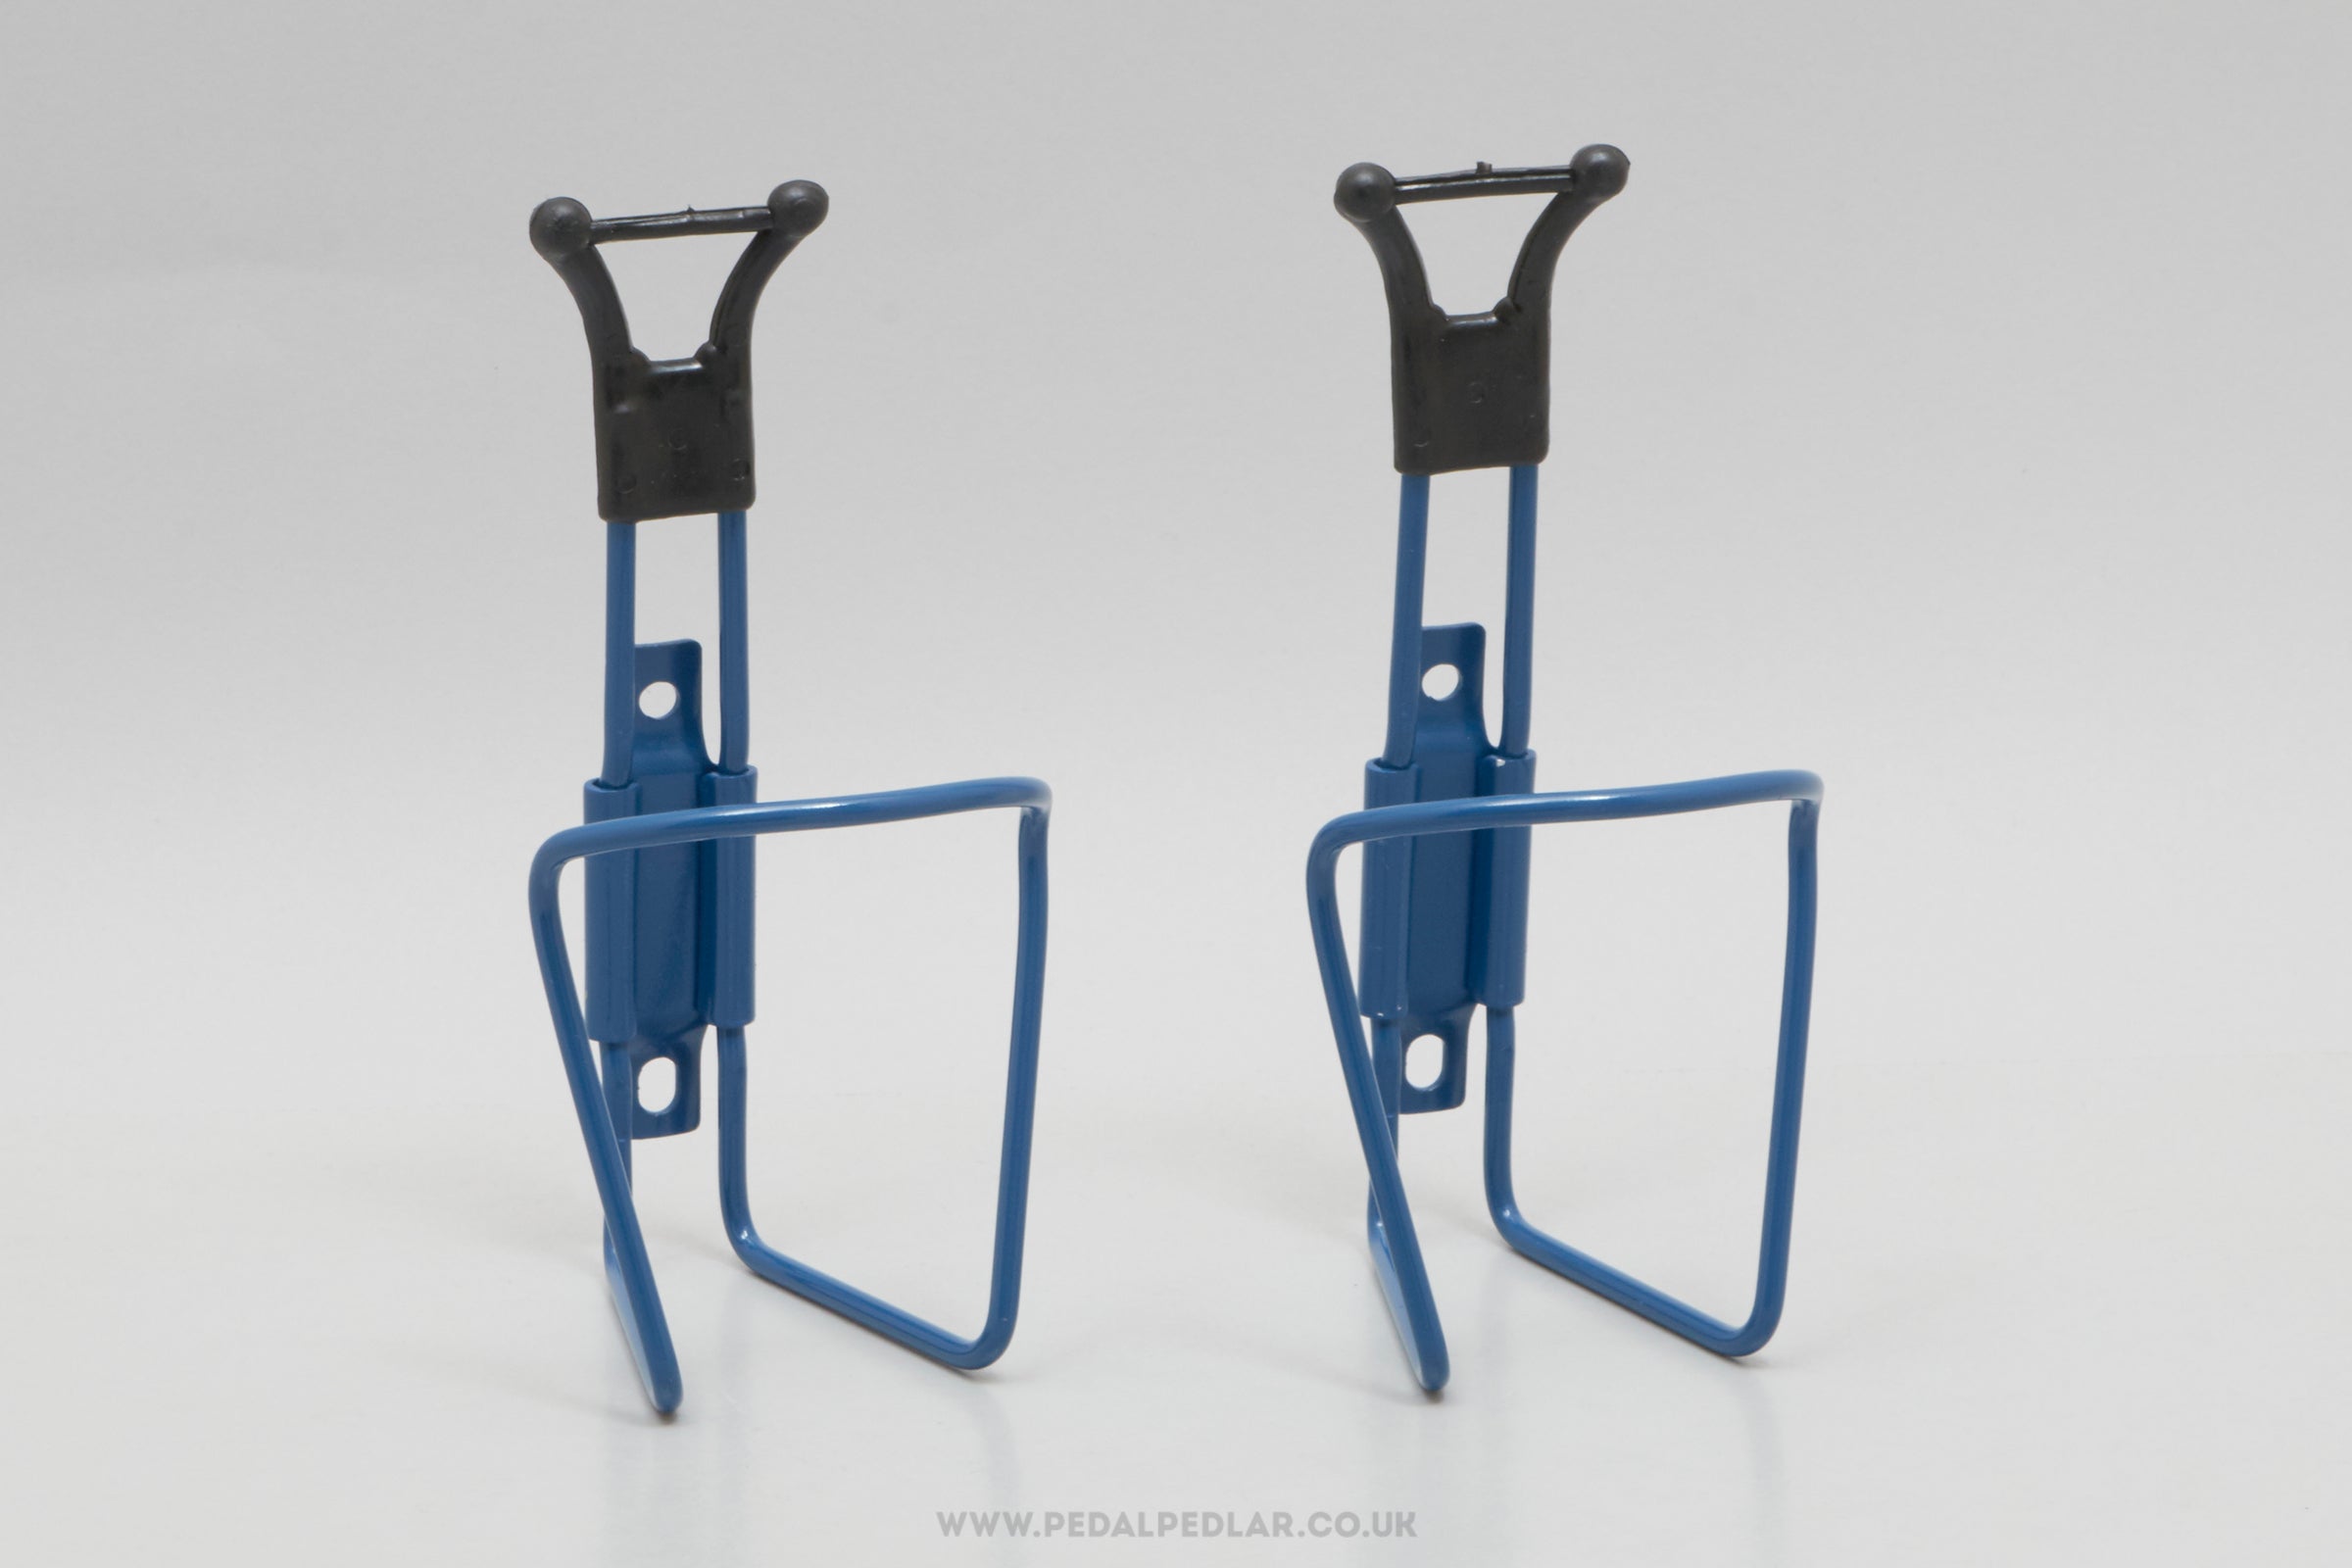 Vintage TA Style NOS Blue Bottle Cages - Pedal Pedlar - Buy New Old Stock Cycle Accessories